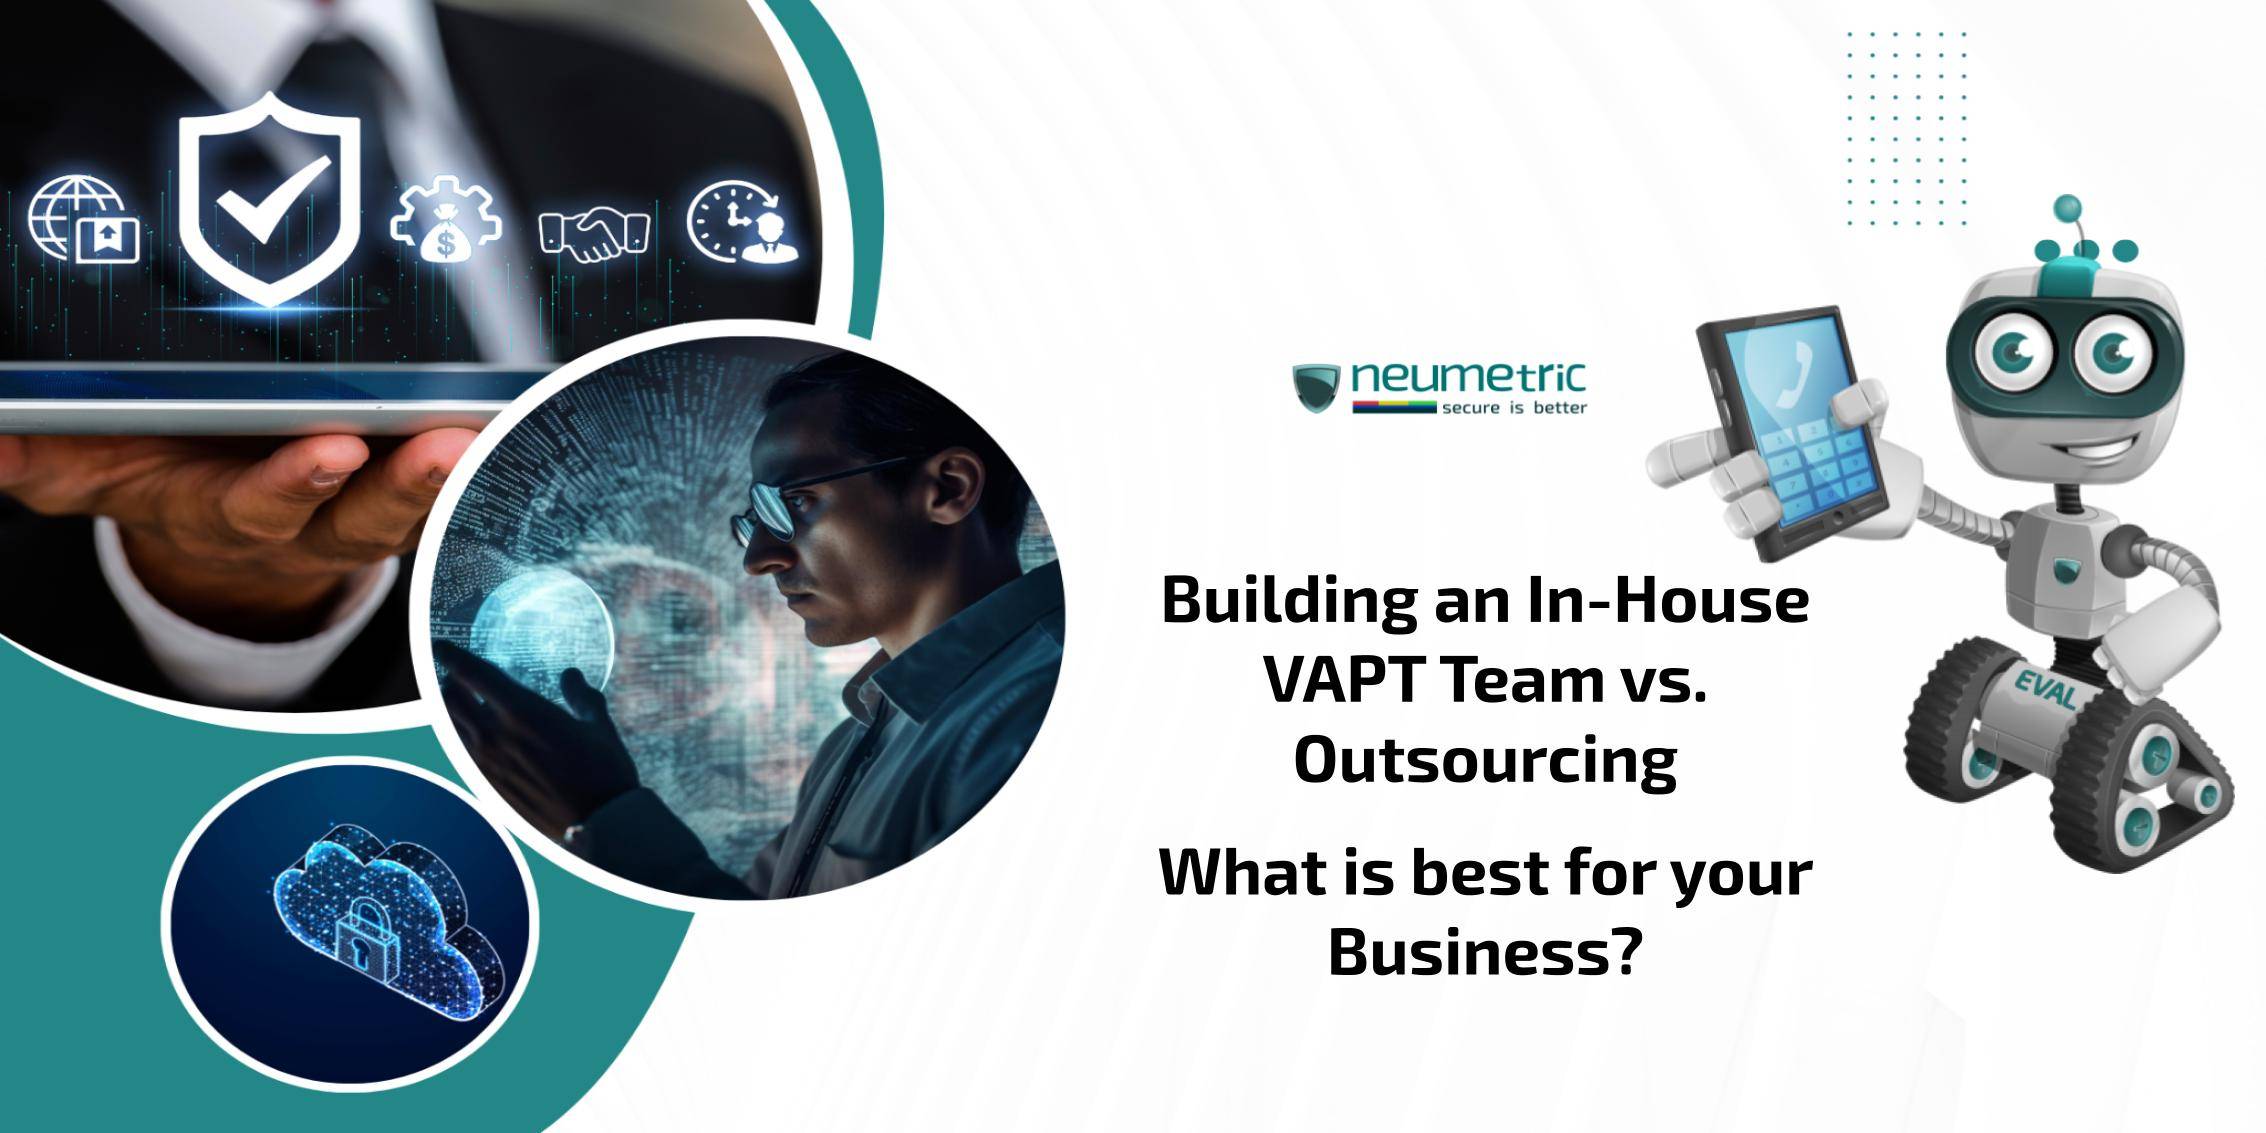 Building an In-House VAPT Team vs Outsourcing: What is best for your Business?